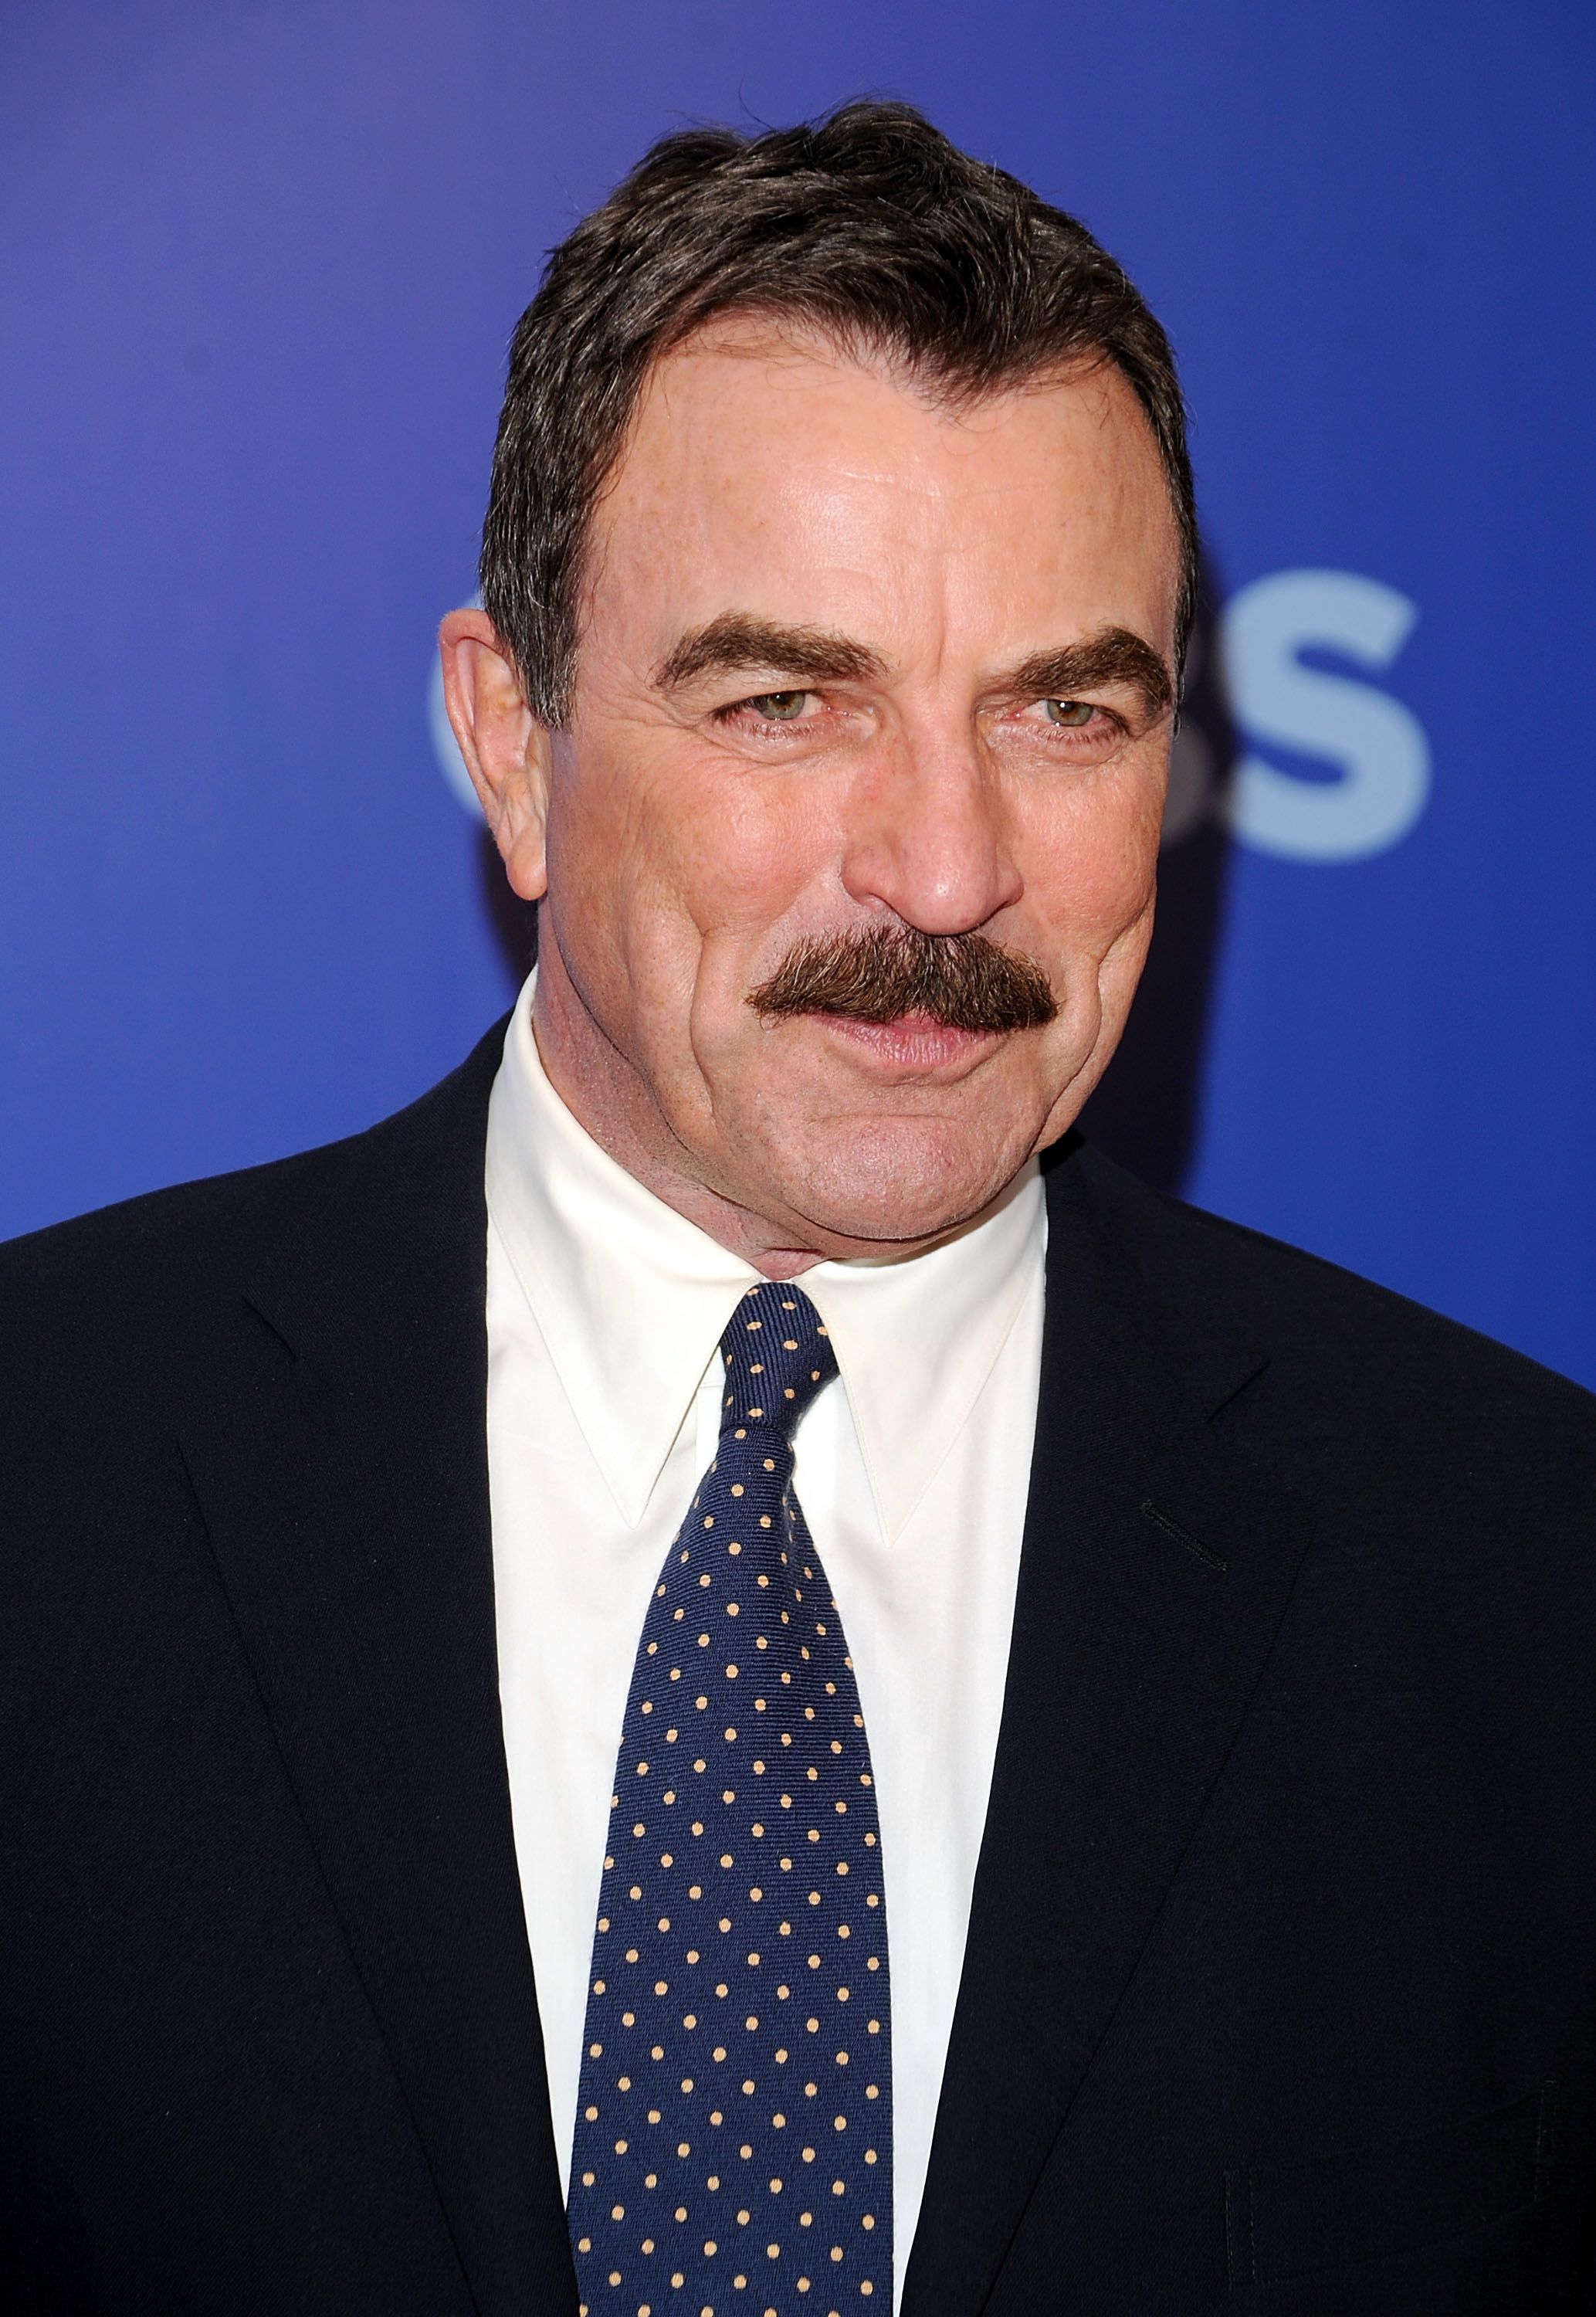 Tom Selleck at CBS UpFront at Damrosch Park, Lincoln Center on May 19, 2010 | Source: Getty Images